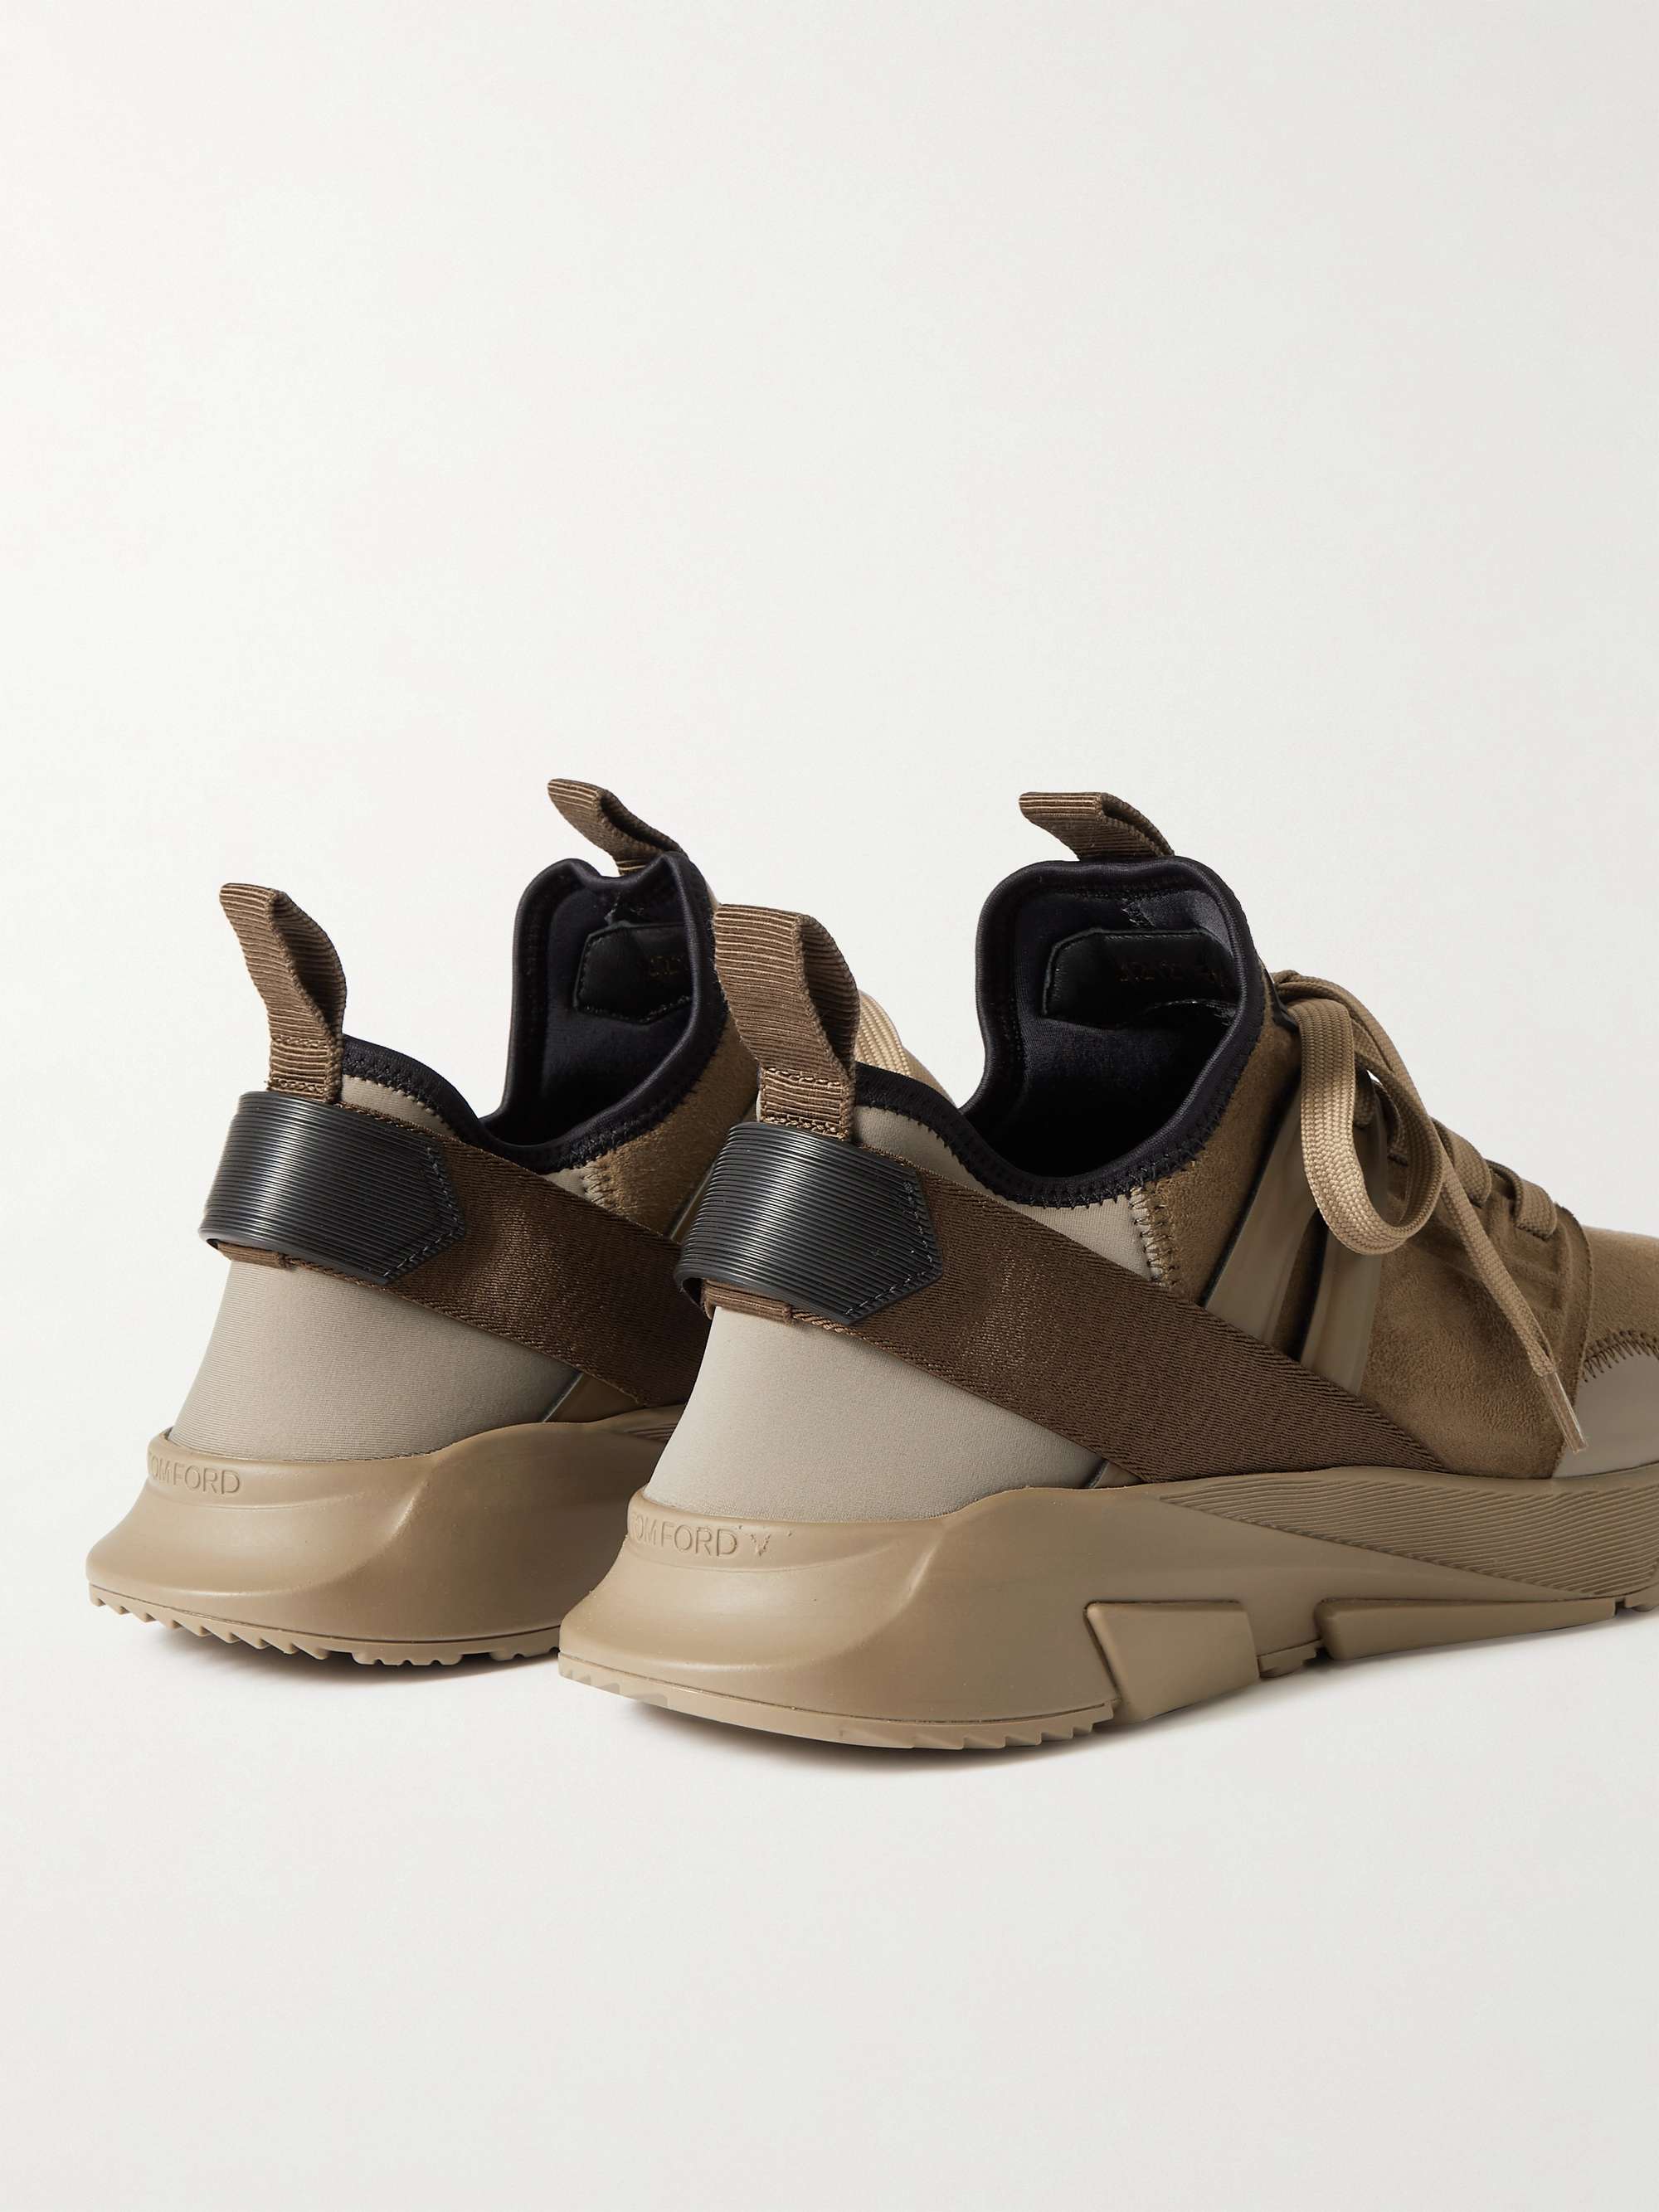 TOM FORD Jago Neoprene, Suede and Leather Sneakers